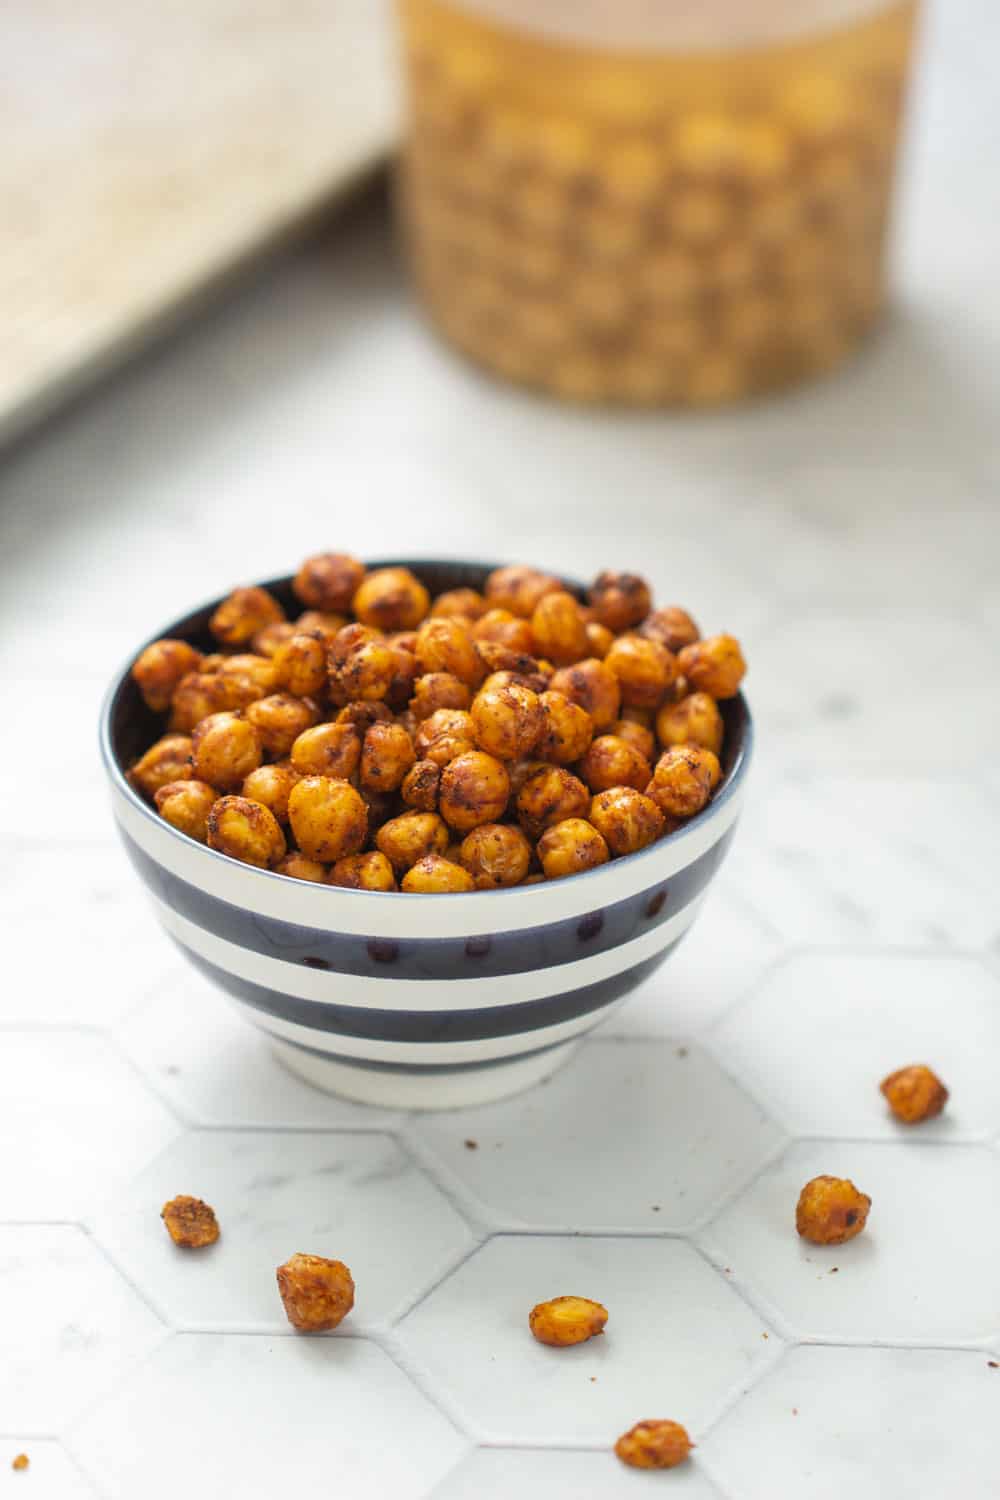 crispy baked chickpeas in a striped bowl